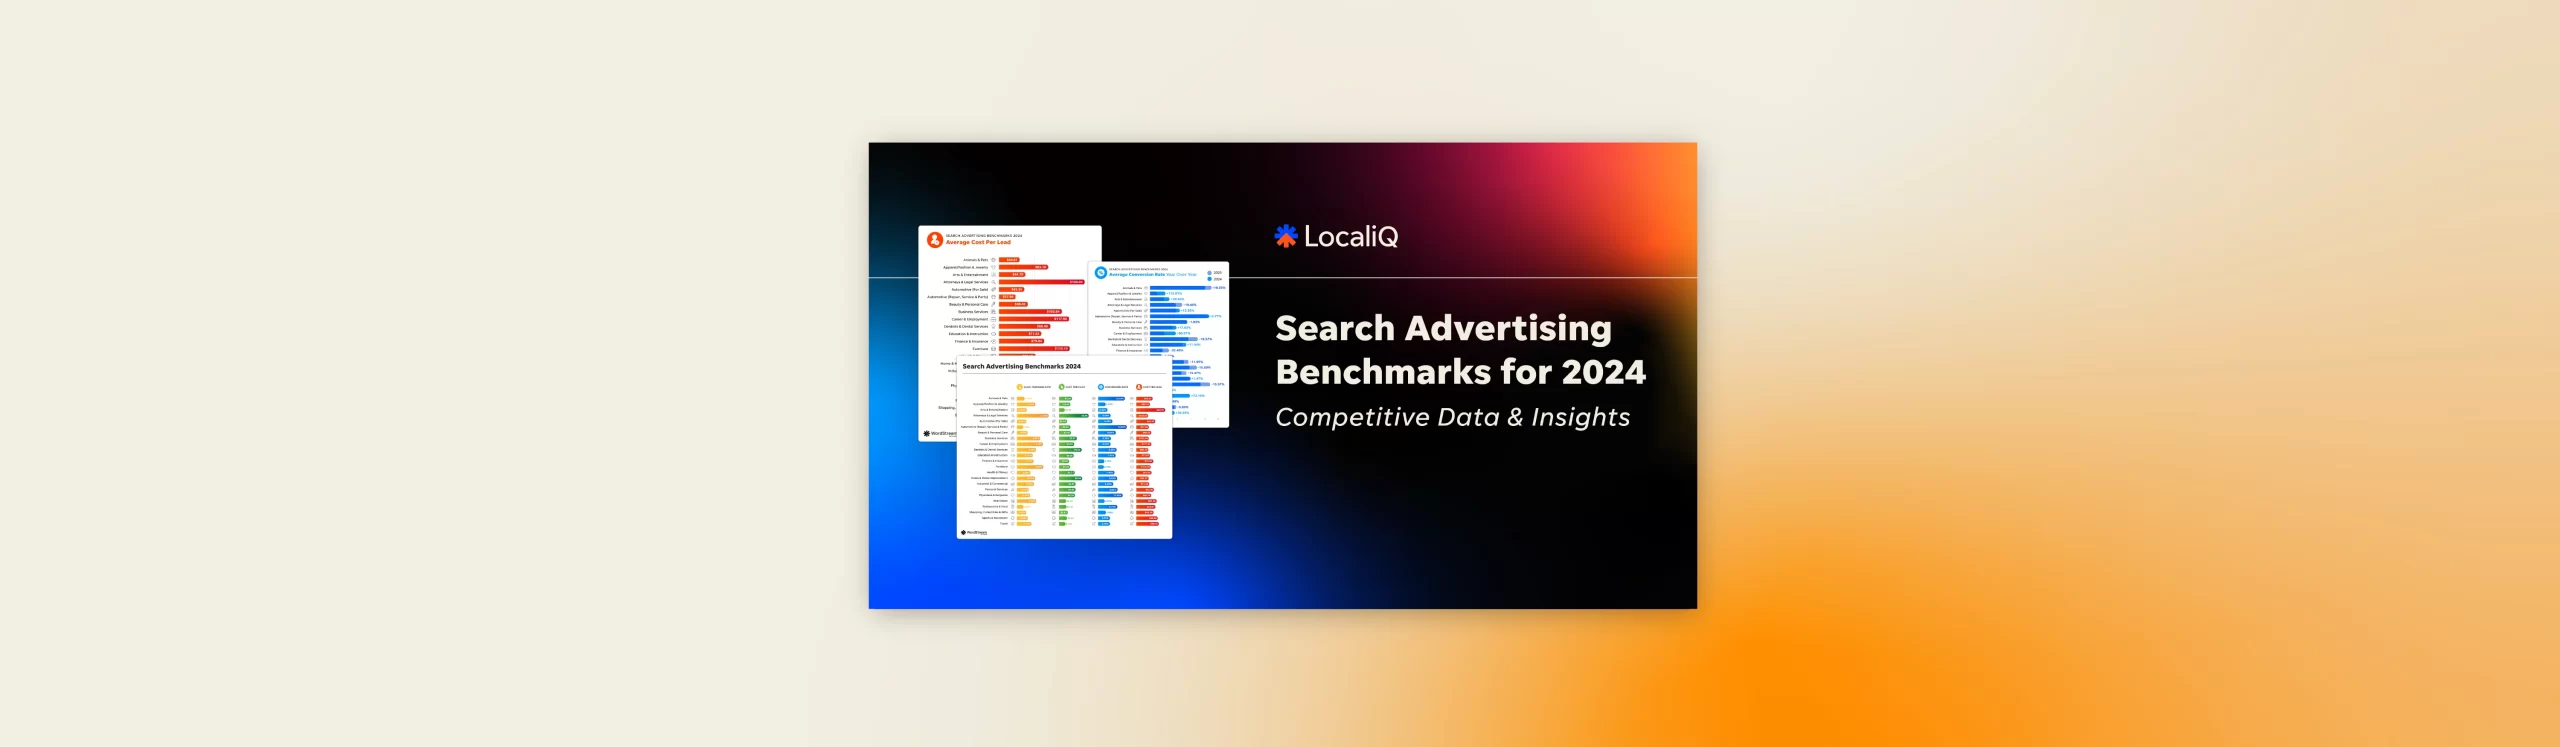 Search Advertising Benchmarks for 2024: Competitive Data & Insights